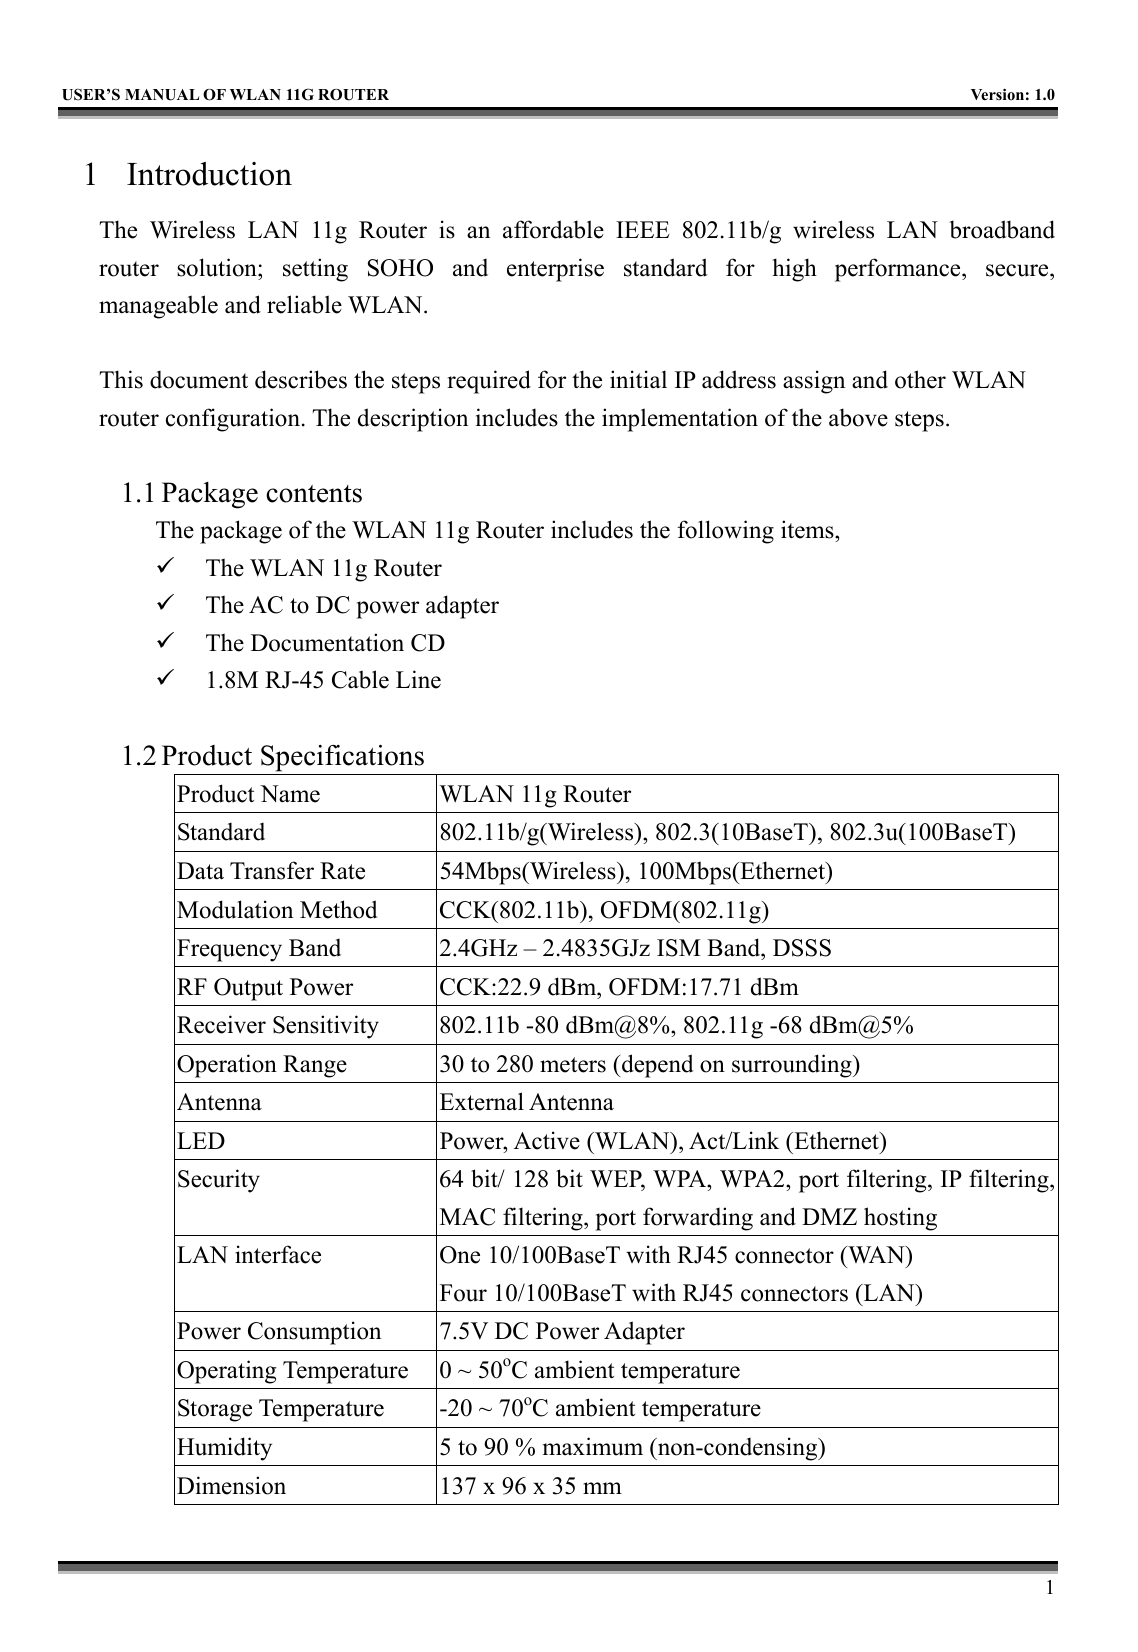   USER’S MANUAL OF WLAN 11G ROUTER    Version: 1.0     1 1 Introduction The Wireless LAN 11g Router is an affordable IEEE 802.11b/g wireless LAN broadband router solution; setting SOHO and enterprise standard for high performance, secure, manageable and reliable WLAN.  This document describes the steps required for the initial IP address assign and other WLAN router configuration. The description includes the implementation of the above steps.  1.1 Package contents The package of the WLAN 11g Router includes the following items,   The WLAN 11g Router   The AC to DC power adapter   The Documentation CD   1.8M RJ-45 Cable Line  1.2 Product Specifications Product Name  WLAN 11g Router Standard  802.11b/g(Wireless), 802.3(10BaseT), 802.3u(100BaseT) Data Transfer Rate  54Mbps(Wireless), 100Mbps(Ethernet) Modulation Method  CCK(802.11b), OFDM(802.11g) Frequency Band  2.4GHz – 2.4835GJz ISM Band, DSSS RF Output Power  CCK:22.9 dBm, OFDM:17.71 dBm Receiver Sensitivity  802.11b -80 dBm@8%, 802.11g -68 dBm@5% Operation Range  30 to 280 meters (depend on surrounding) Antenna External Antenna LED  Power, Active (WLAN), Act/Link (Ethernet) Security  64 bit/ 128 bit WEP, WPA, WPA2, port filtering, IP filtering, MAC filtering, port forwarding and DMZ hosting LAN interface  One 10/100BaseT with RJ45 connector (WAN) Four 10/100BaseT with RJ45 connectors (LAN) Power Consumption  7.5V DC Power Adapter Operating Temperature  0 ~ 50oC ambient temperature Storage Temperature  -20 ~ 70oC ambient temperature Humidity  5 to 90 % maximum (non-condensing) Dimension  137 x 96 x 35 mm 